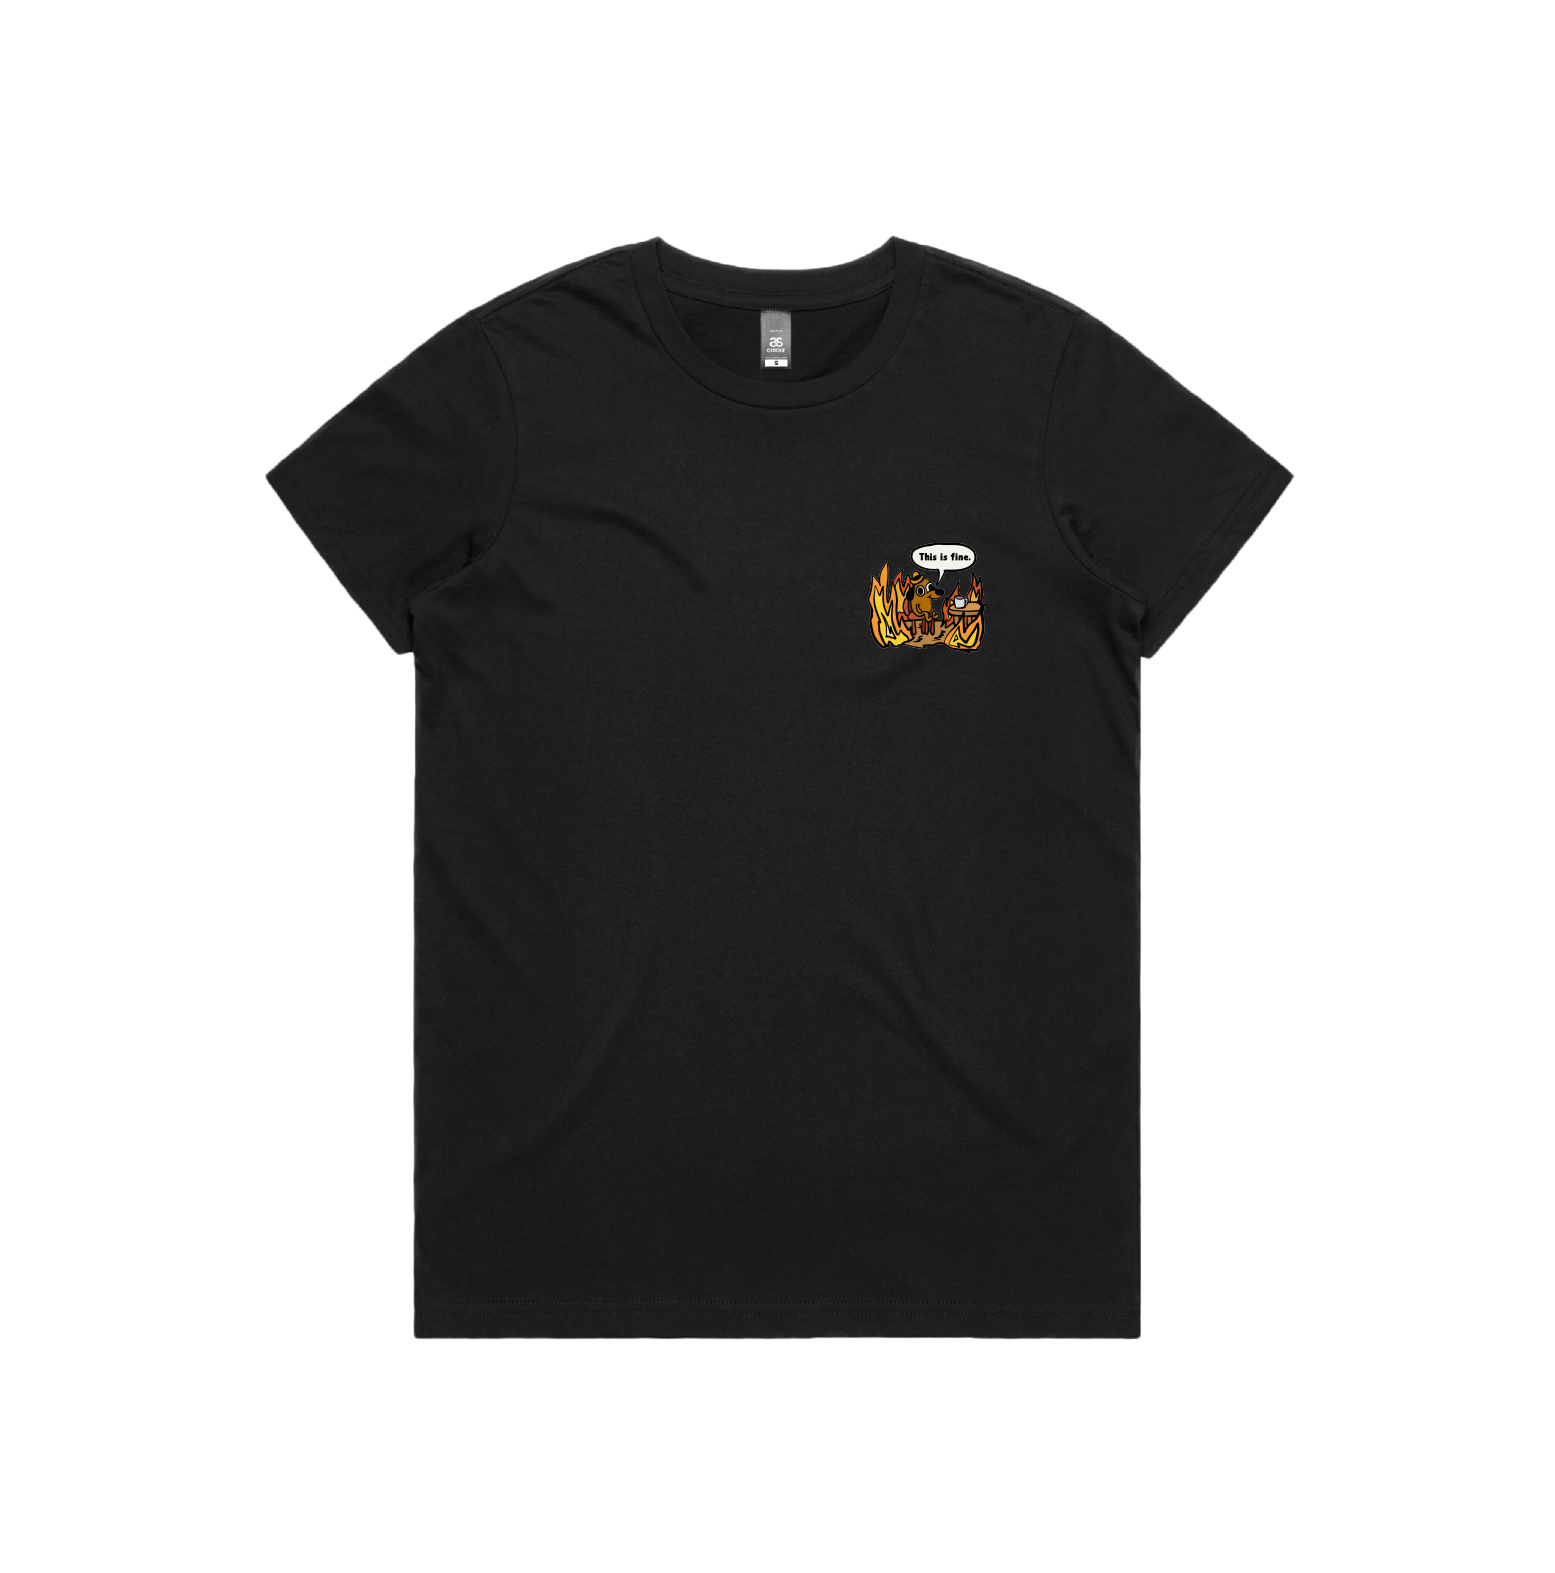 XS / Black / Small Front Design This Is Fine 🔥 - Women's T Shirt